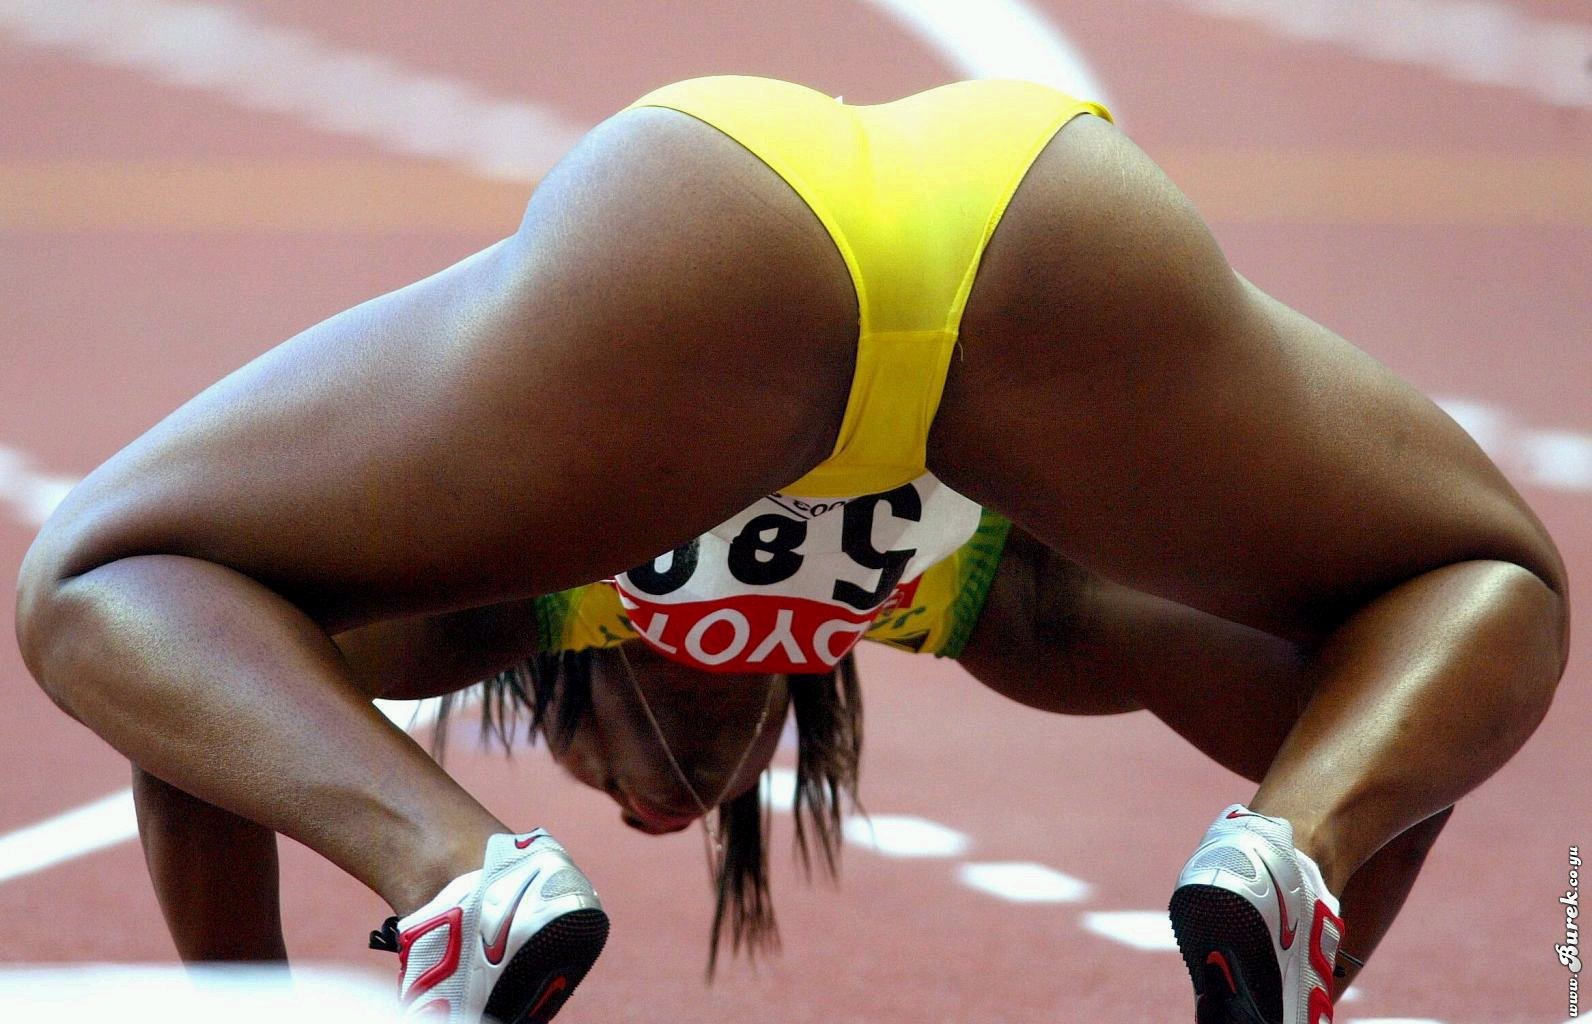 Upskirt of track and field runners